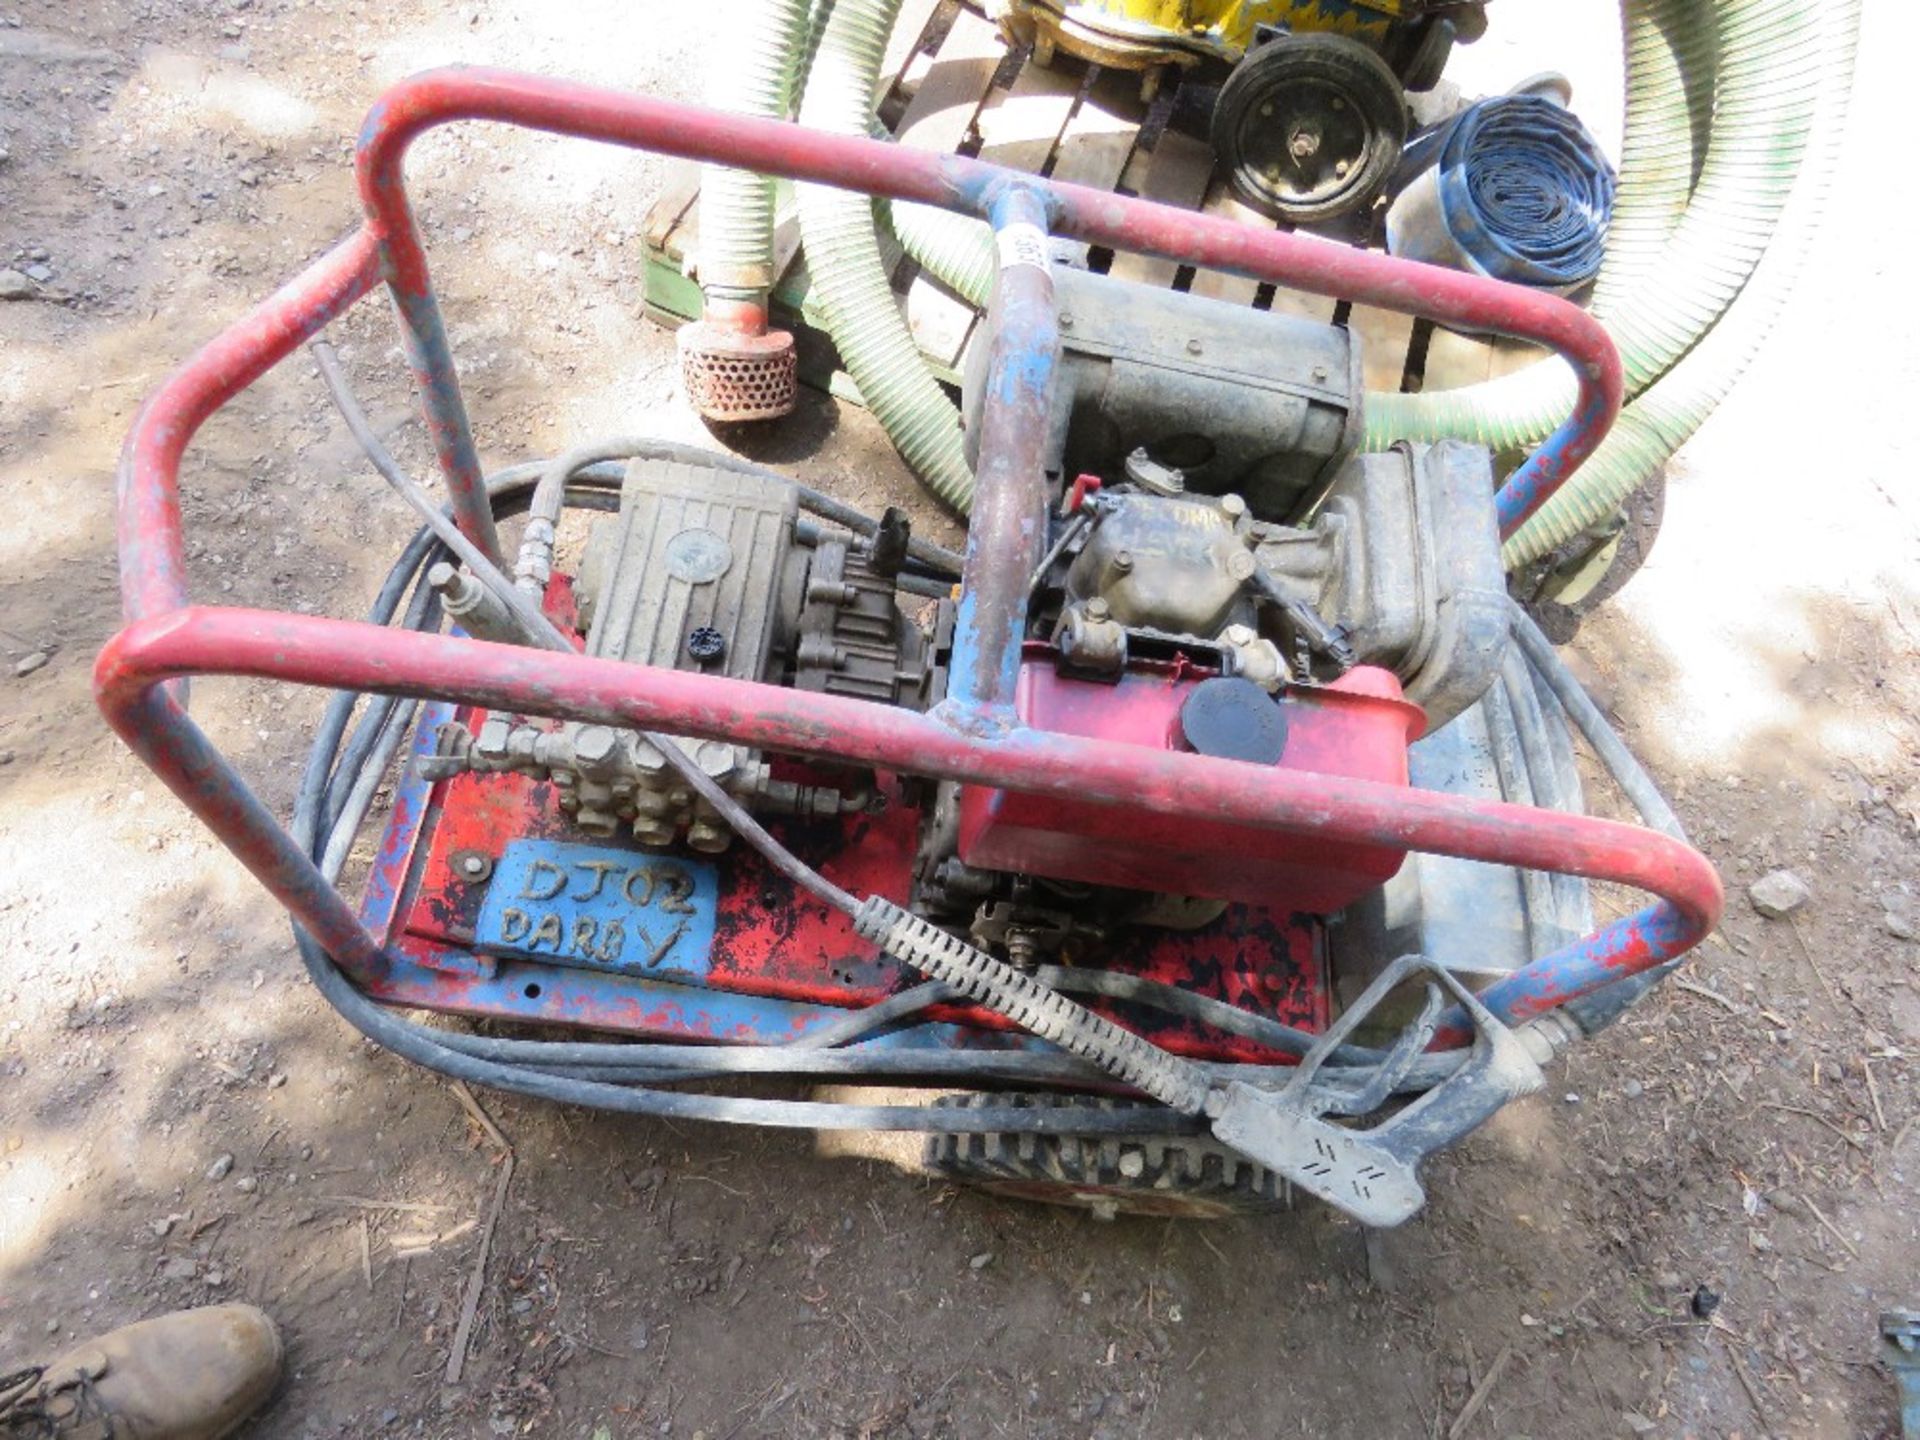 YANMAR ENGINED HIGH PRESSURE WASHER. DIRECT FROM A LOCAL GROUNDWORKS COMPANY AS PART OF THEIR RES - Image 2 of 3